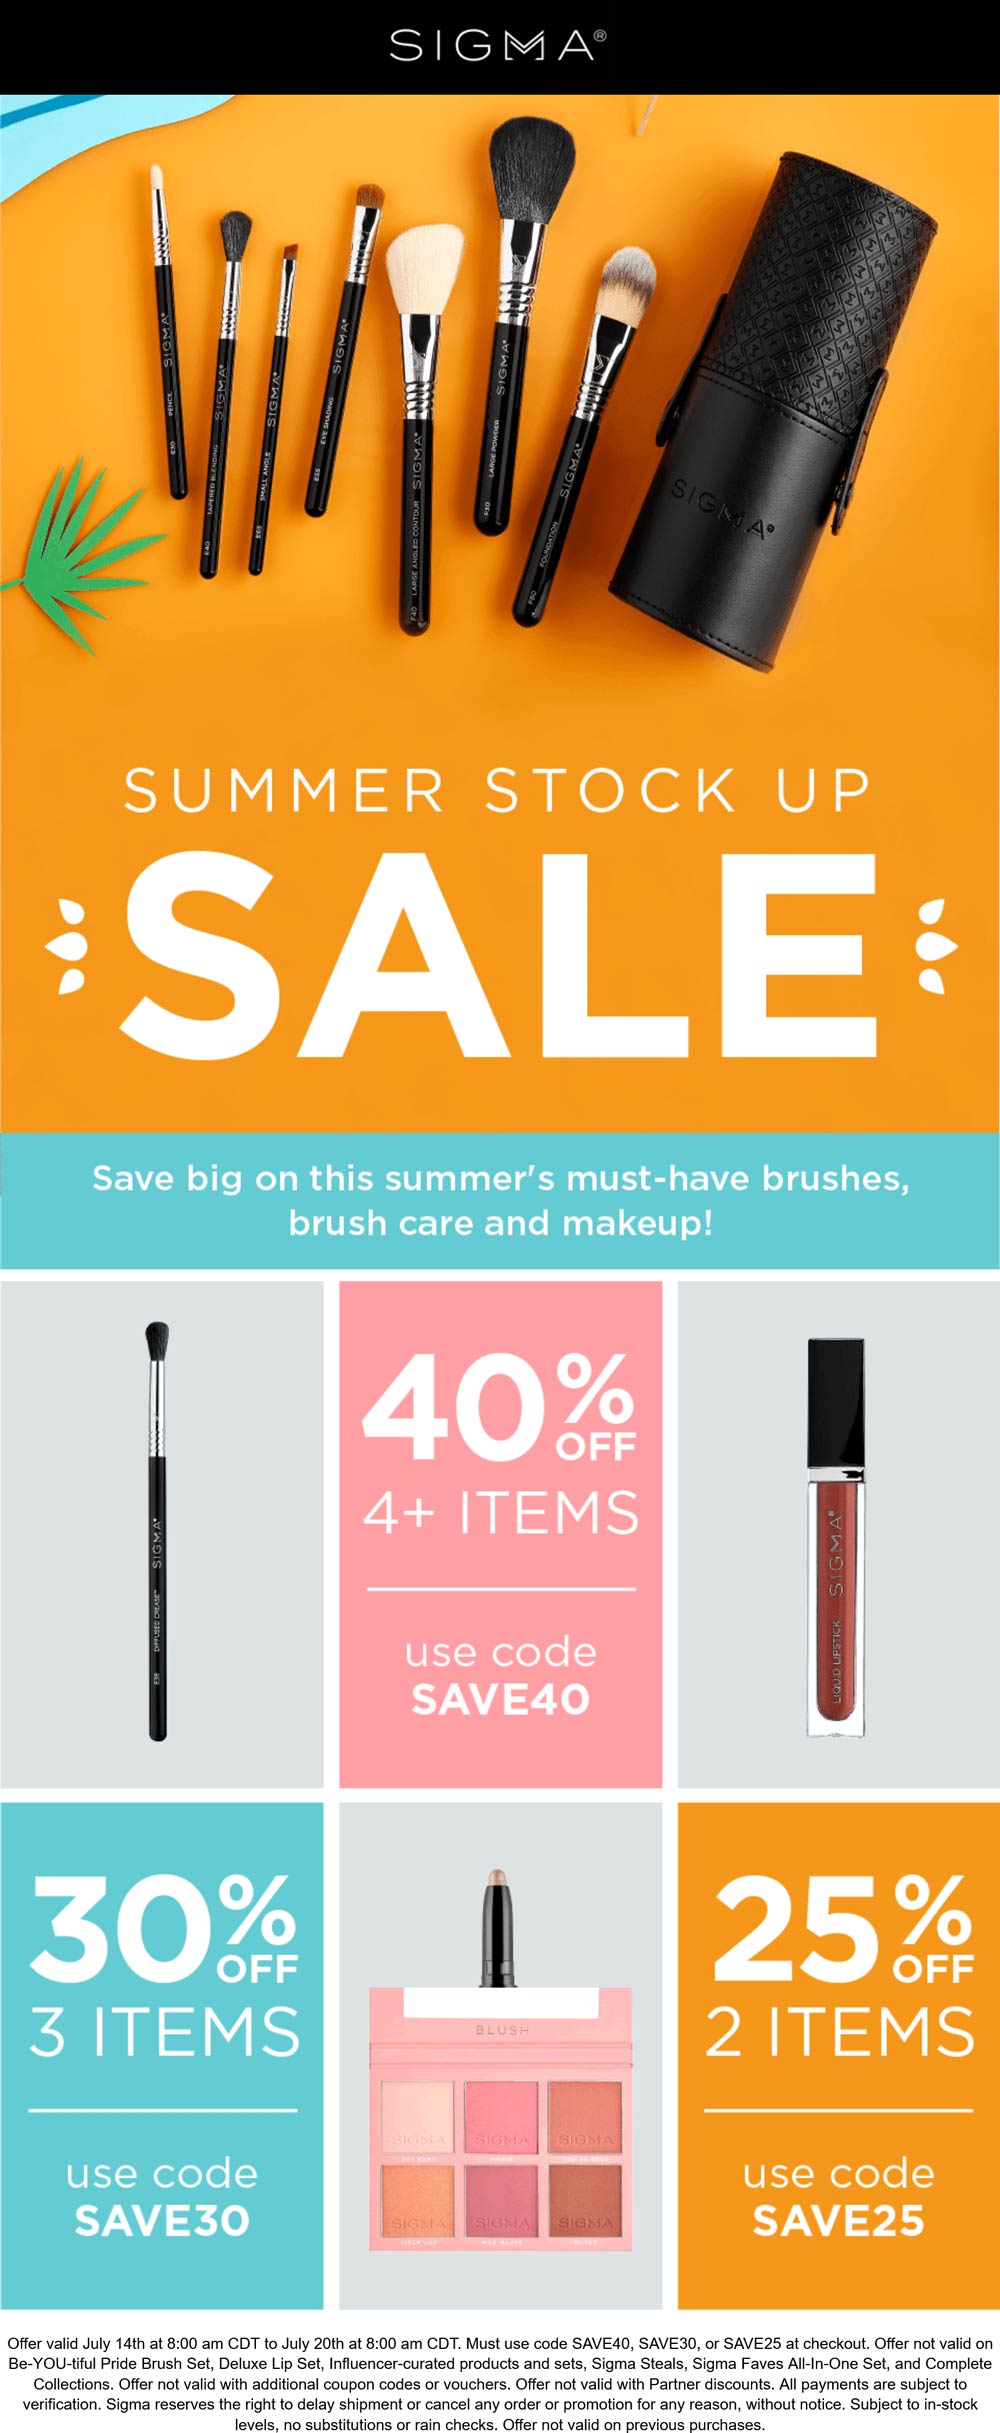 Sigma Beauty stores Coupon  25-40% off 2+ items today at Sigma Beauty via promo code SAVE25 #sigmabeauty 